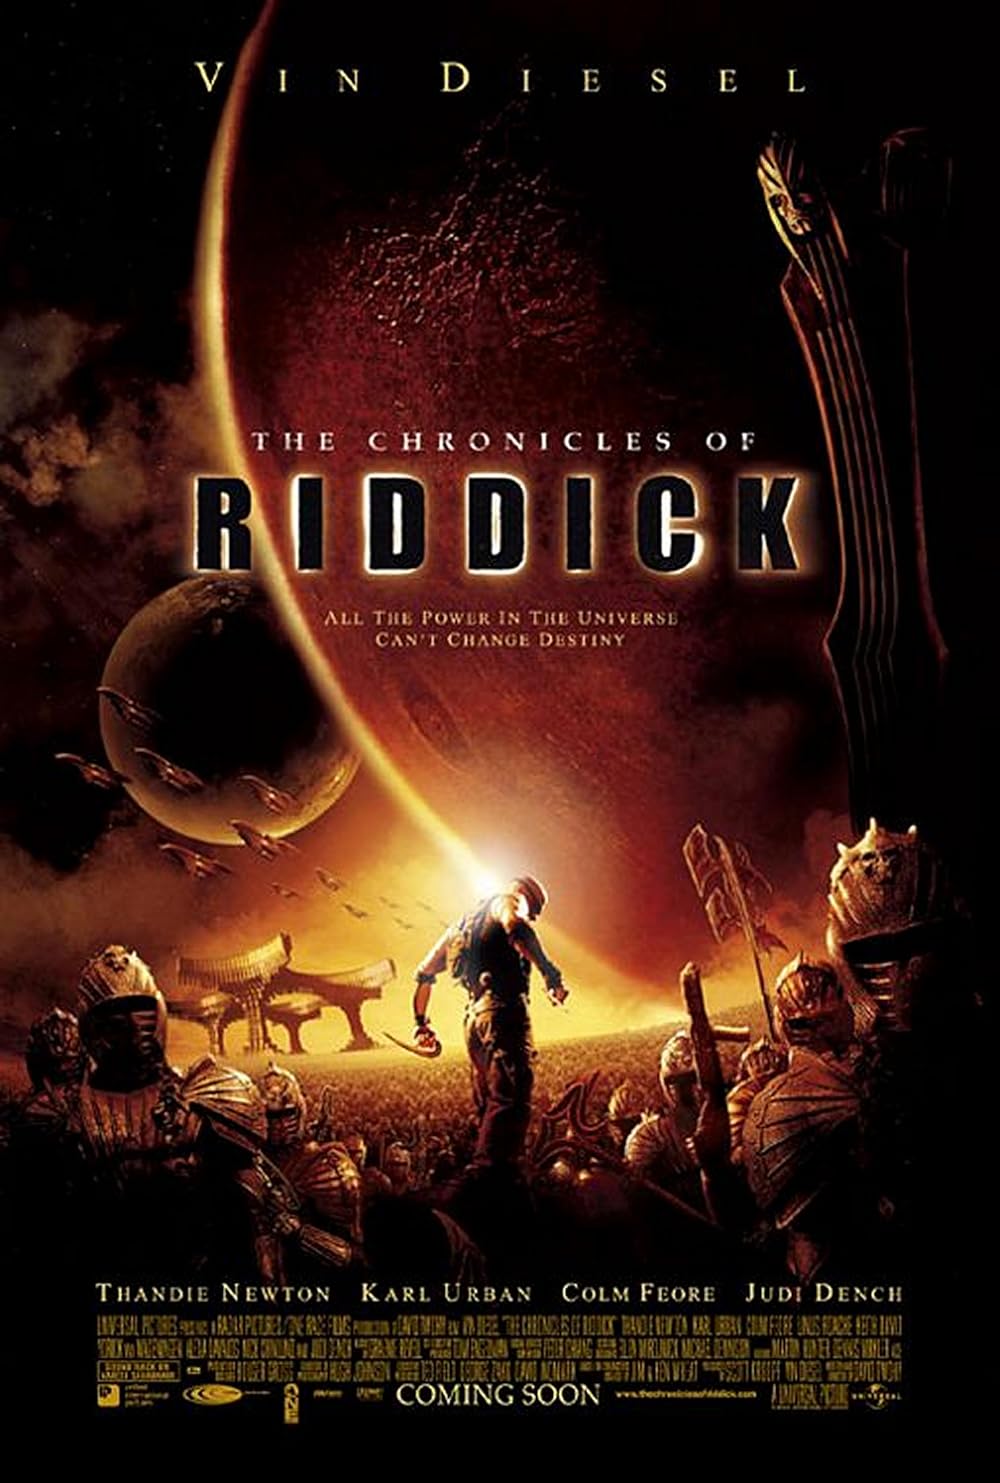 The Chronicles of Riddick (2004) Theatrical Cut 640Kbps 23.976Fps 48Khz 5.1Ch BluRay Turkish Audio TAC